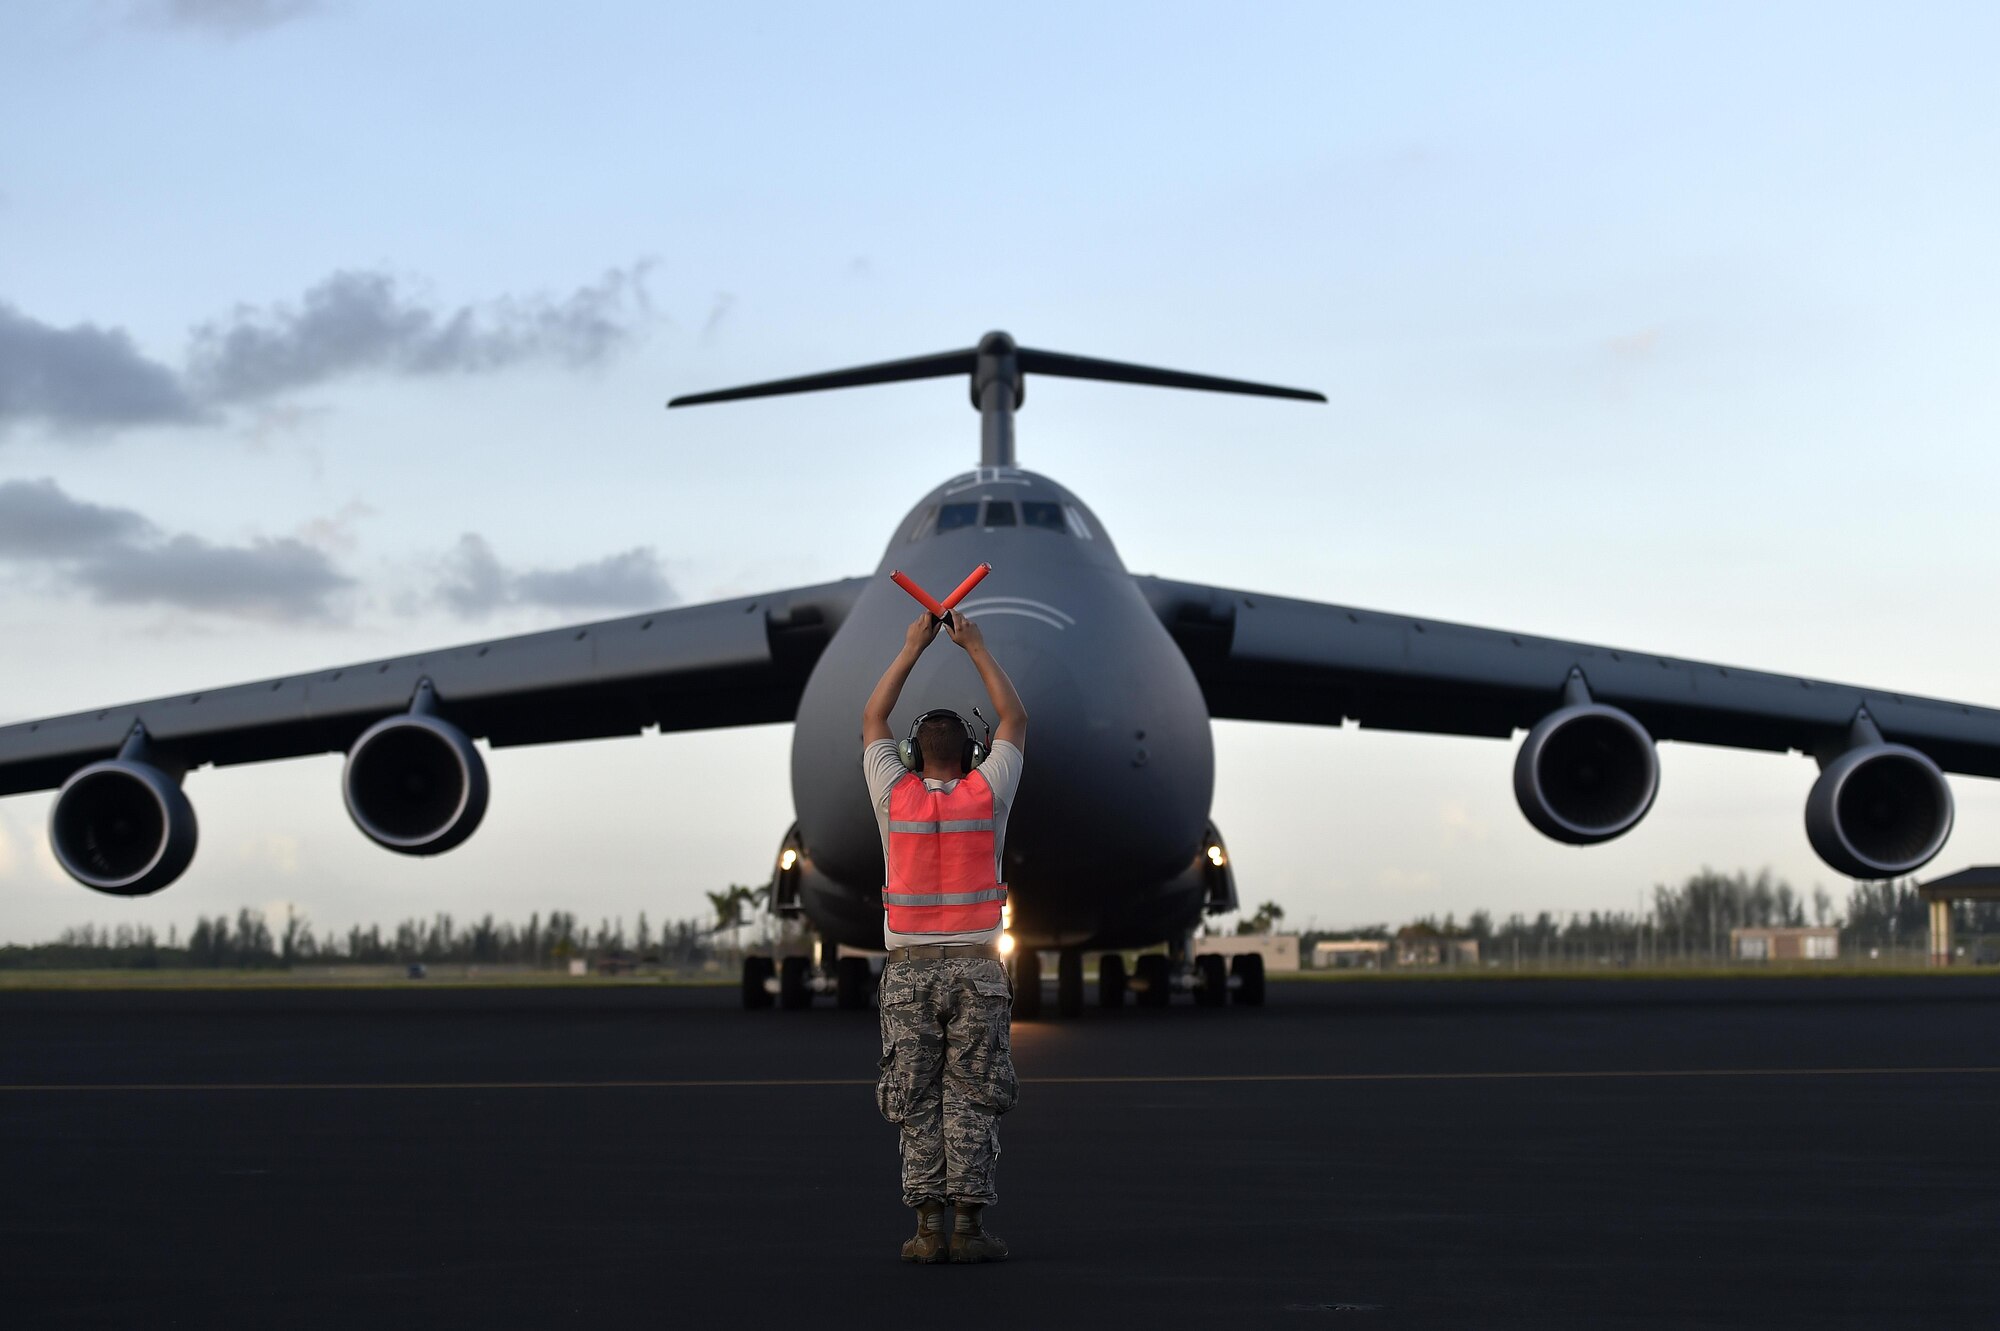 Staff Sgt. Ozzie Slawnikowski, 921st Contingency Response Squadron crew chief, marshals a C-5M Super Galaxy, Sep. 16, 2017, at Homestead Air Reserve Base, Fla. A 17-member contingency response team from the 821st Contingency Response Group from Travis Air Force Base, Calif., deployed to Homestead Air Reserve Base, Fla., to augment the 439th Airlift Wing airfield capabilities in support of Hurricane Irma relief efforts. (U.S. Air Force photo by Tech. Sgt. Liliana Moreno/Released)